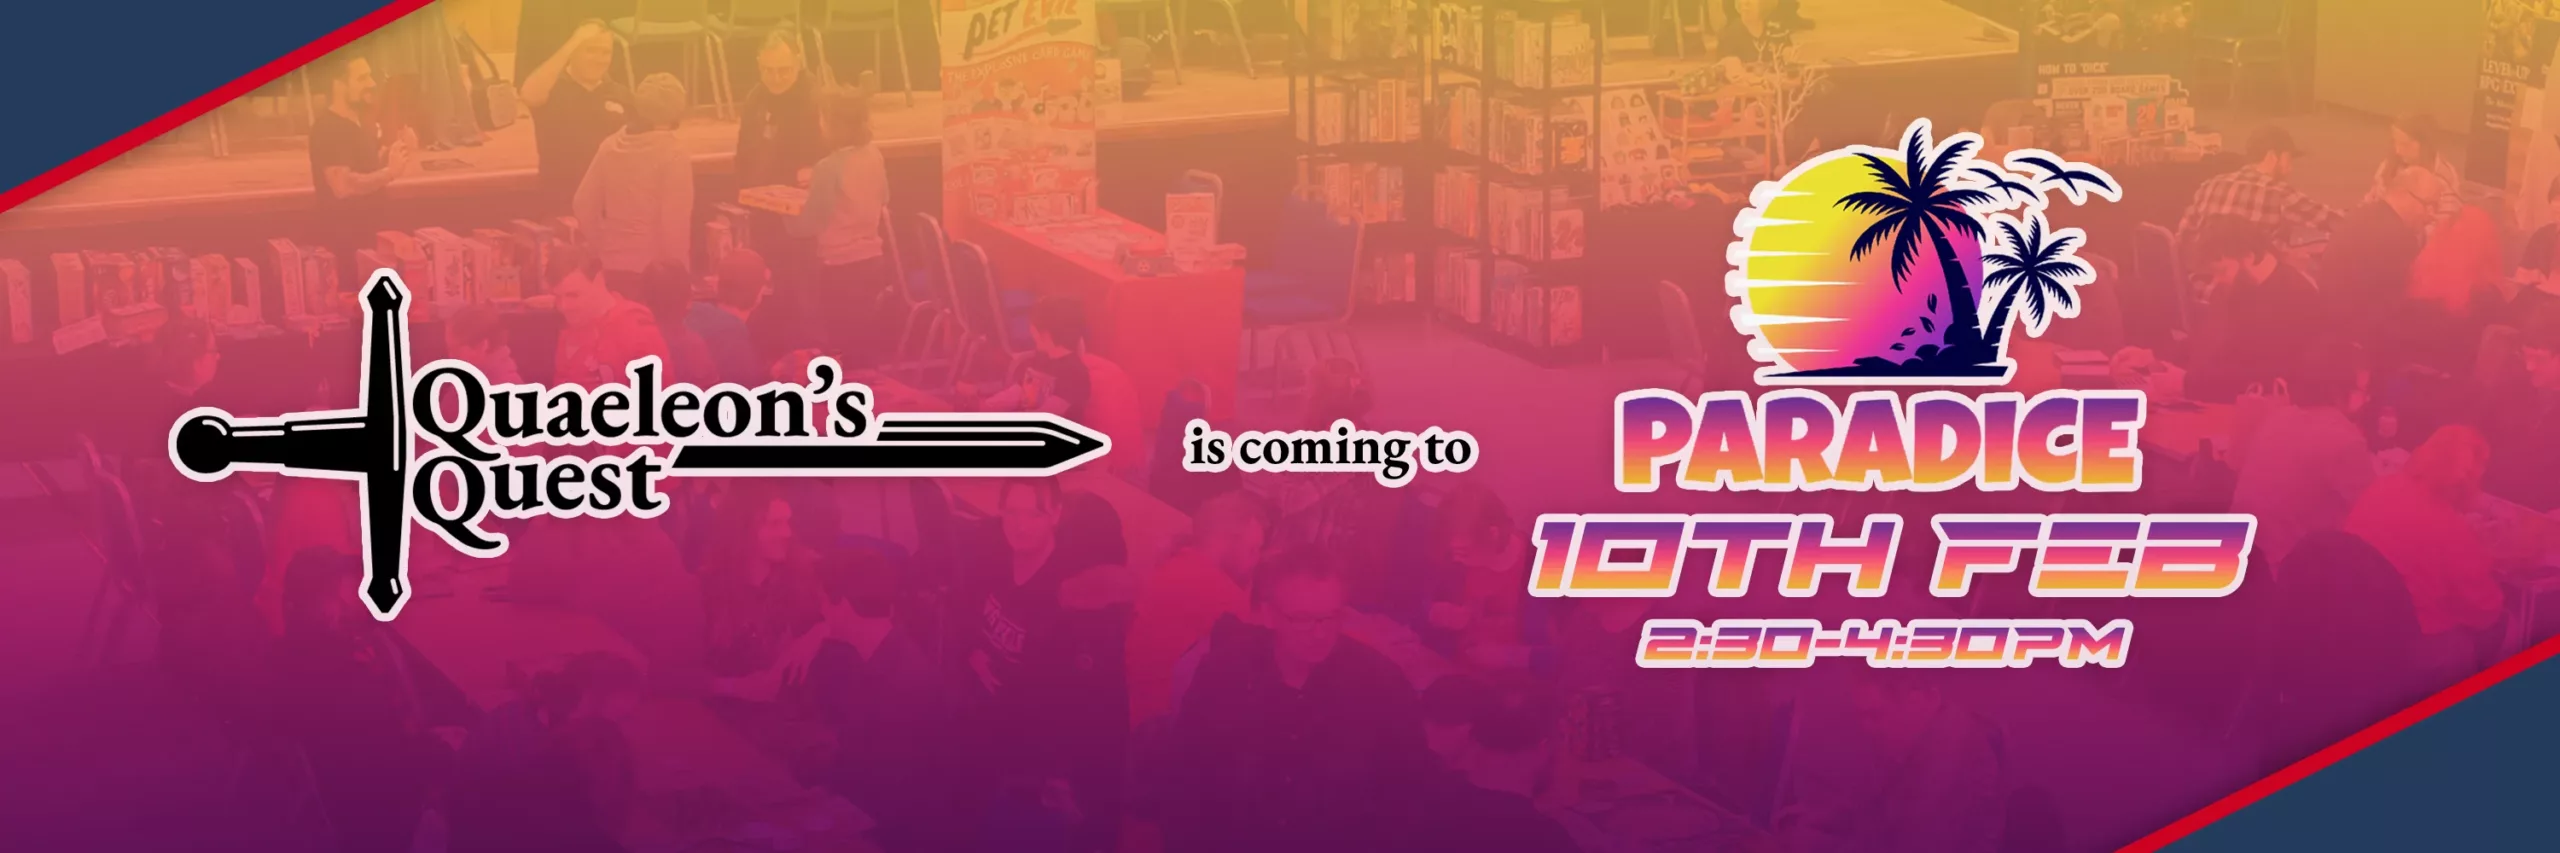 Paradice Gaming Convention 10th Feb